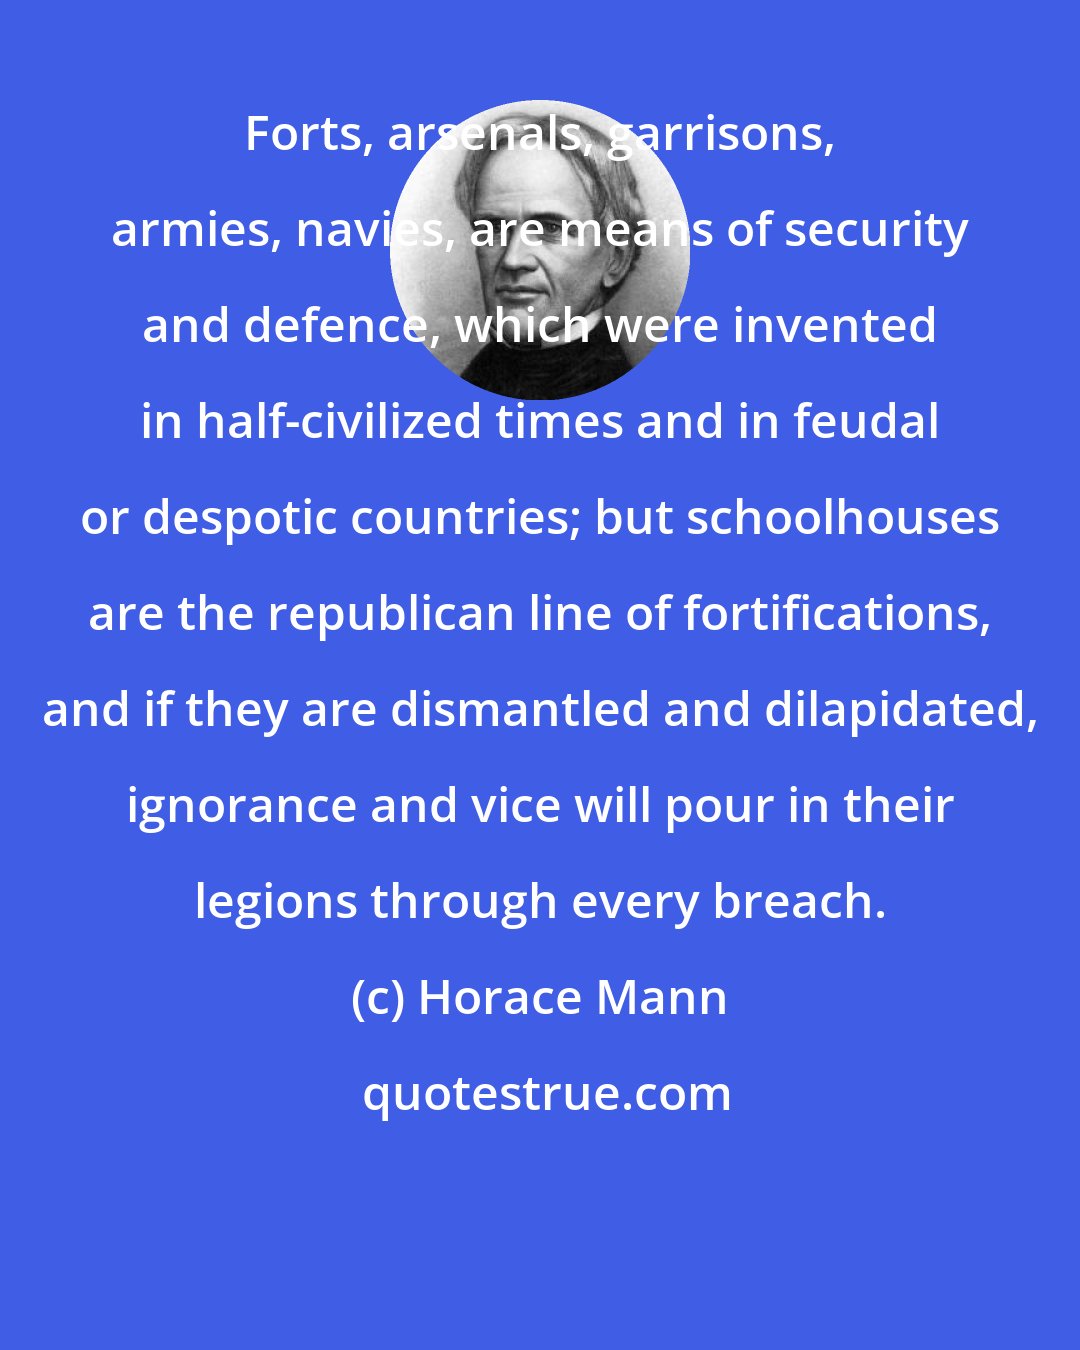 Horace Mann: Forts, arsenals, garrisons, armies, navies, are means of security and defence, which were invented in half-civilized times and in feudal or despotic countries; but schoolhouses are the republican line of fortifications, and if they are dismantled and dilapidated, ignorance and vice will pour in their legions through every breach.